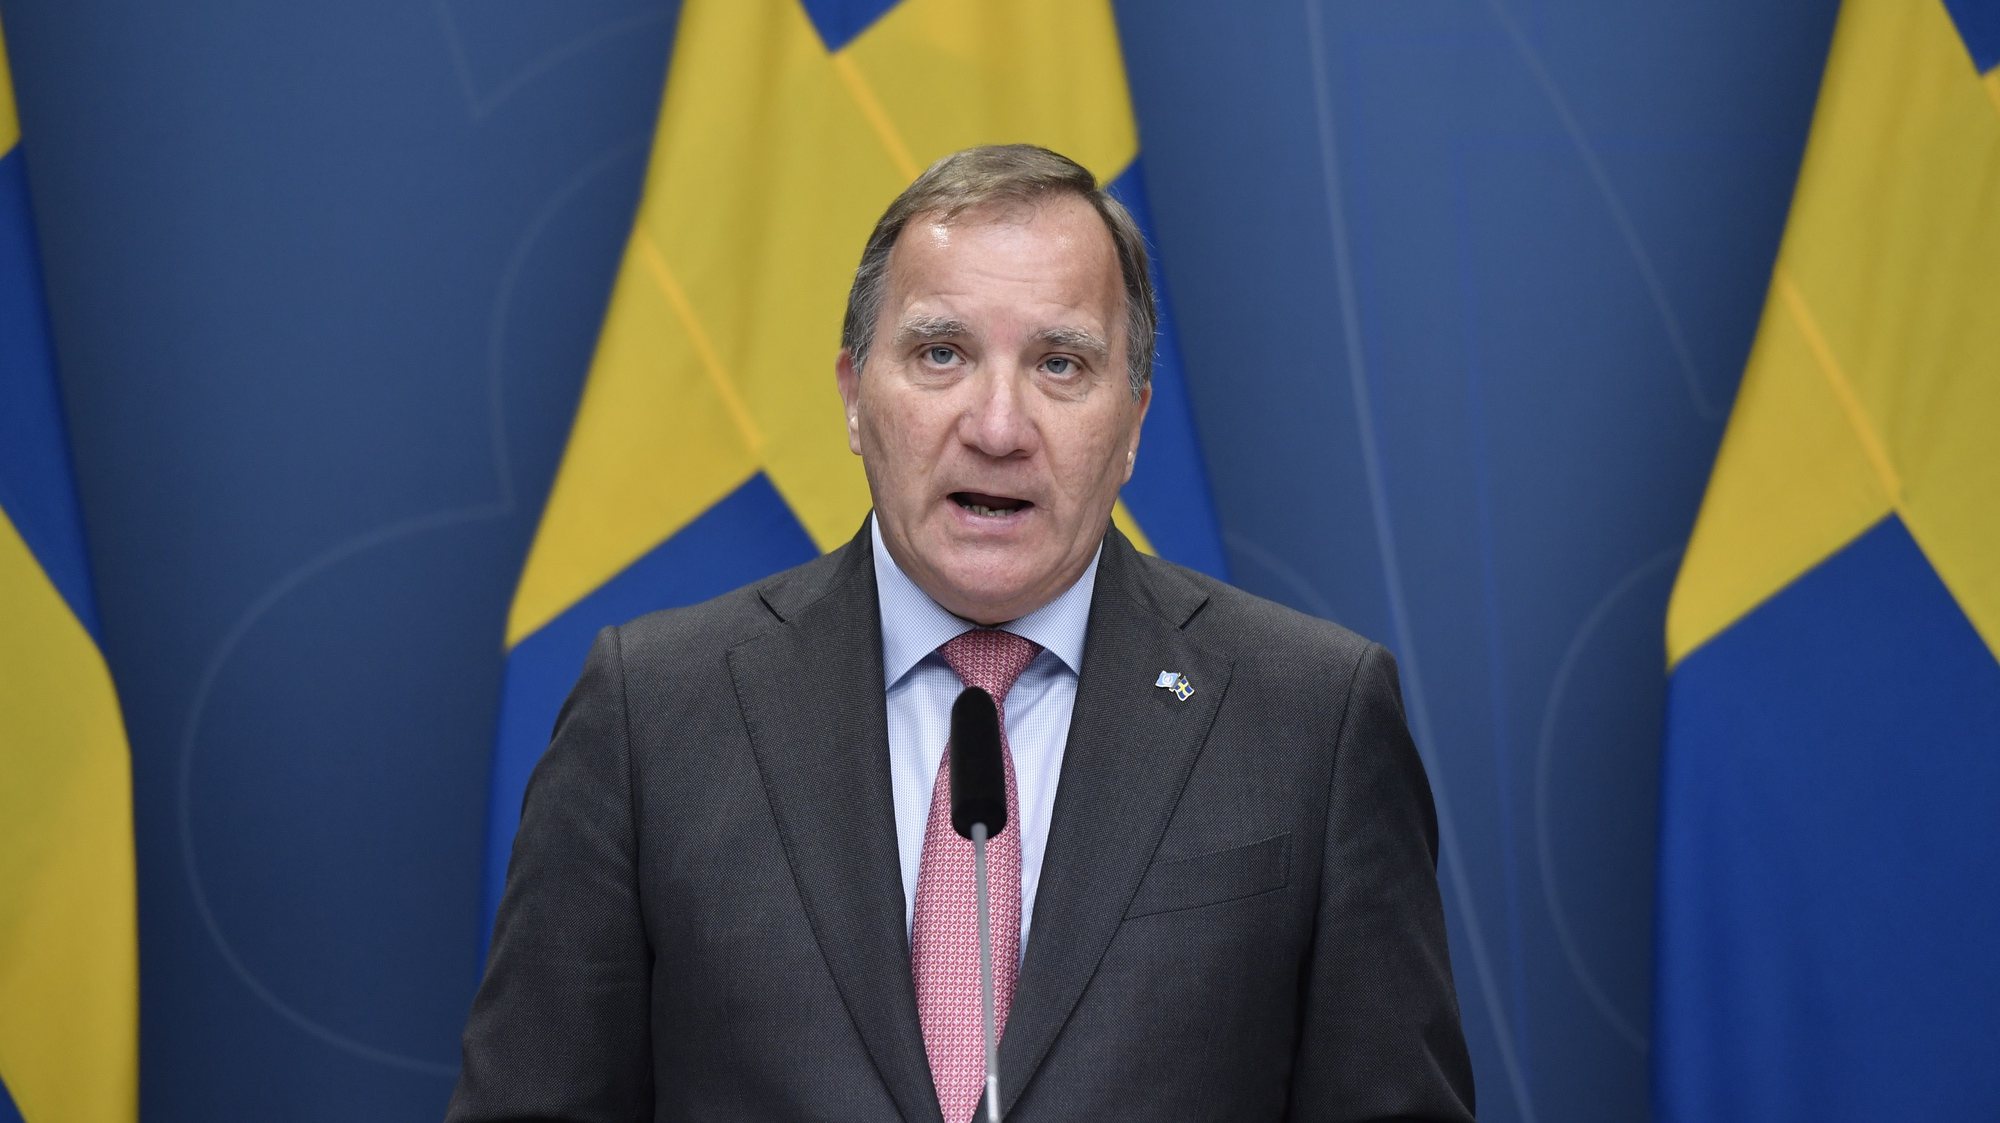 epa09307172 Sweden&#039;s Prime minister Stefan Lofven holds a press conference at Rosenbad in Stockholm, Sweden, 28 June 2021. Lofven announced his resignation after on 21 June he lost in the vote of no confidence against his government at the Swedish parliament, called for by the Left Party as a result of difference of opinion over housing market policy.  EPA/STINA STJERNKVIST  SWEDEN OUT